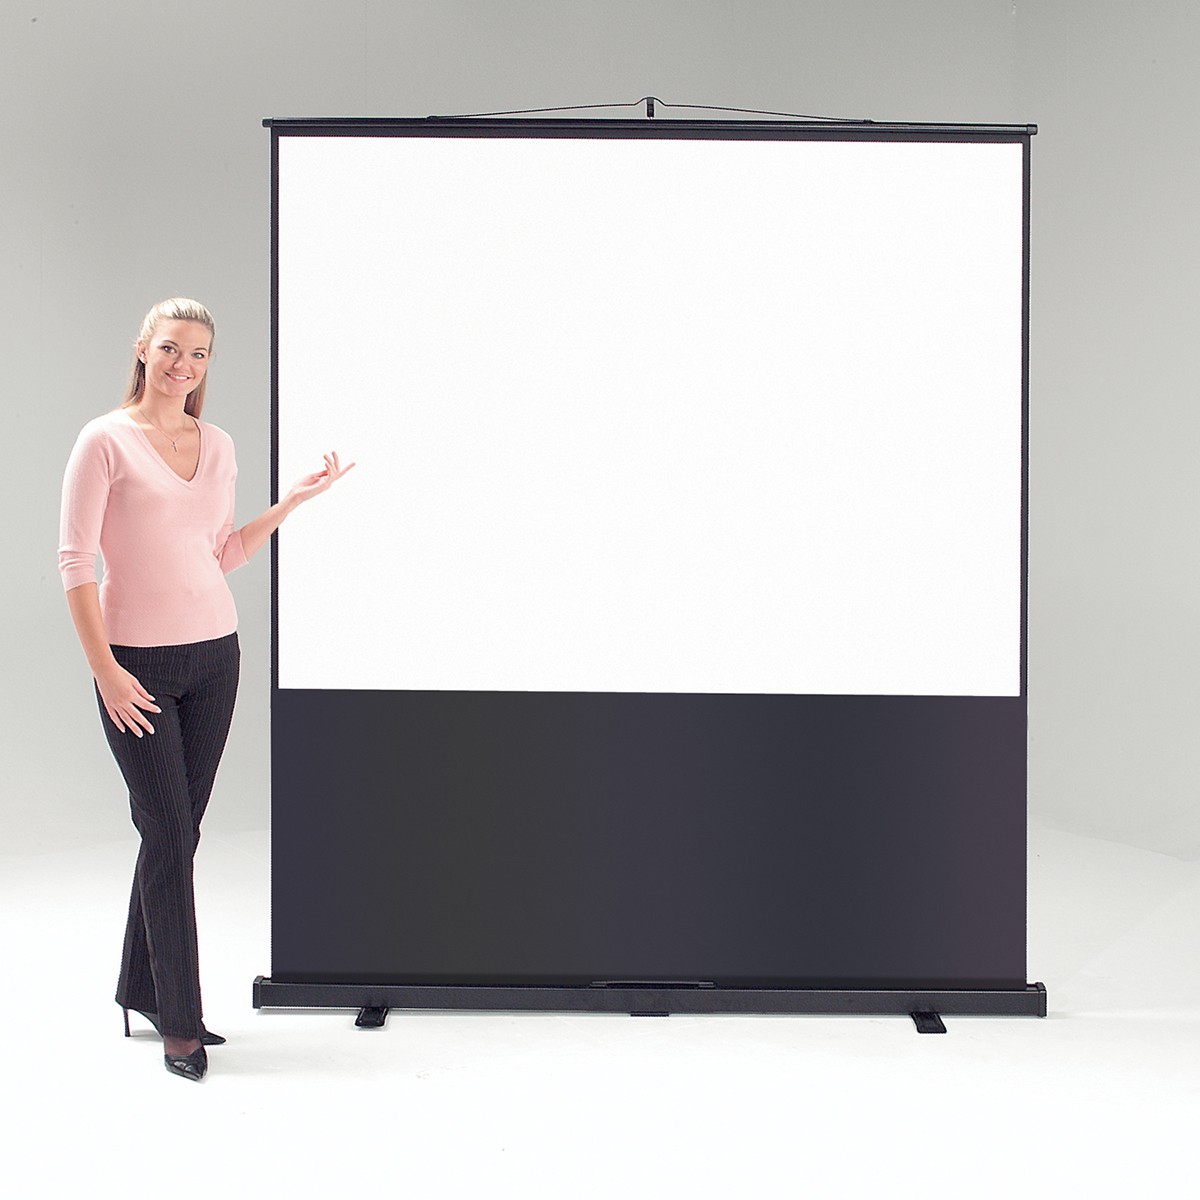 how to choose a projector screen